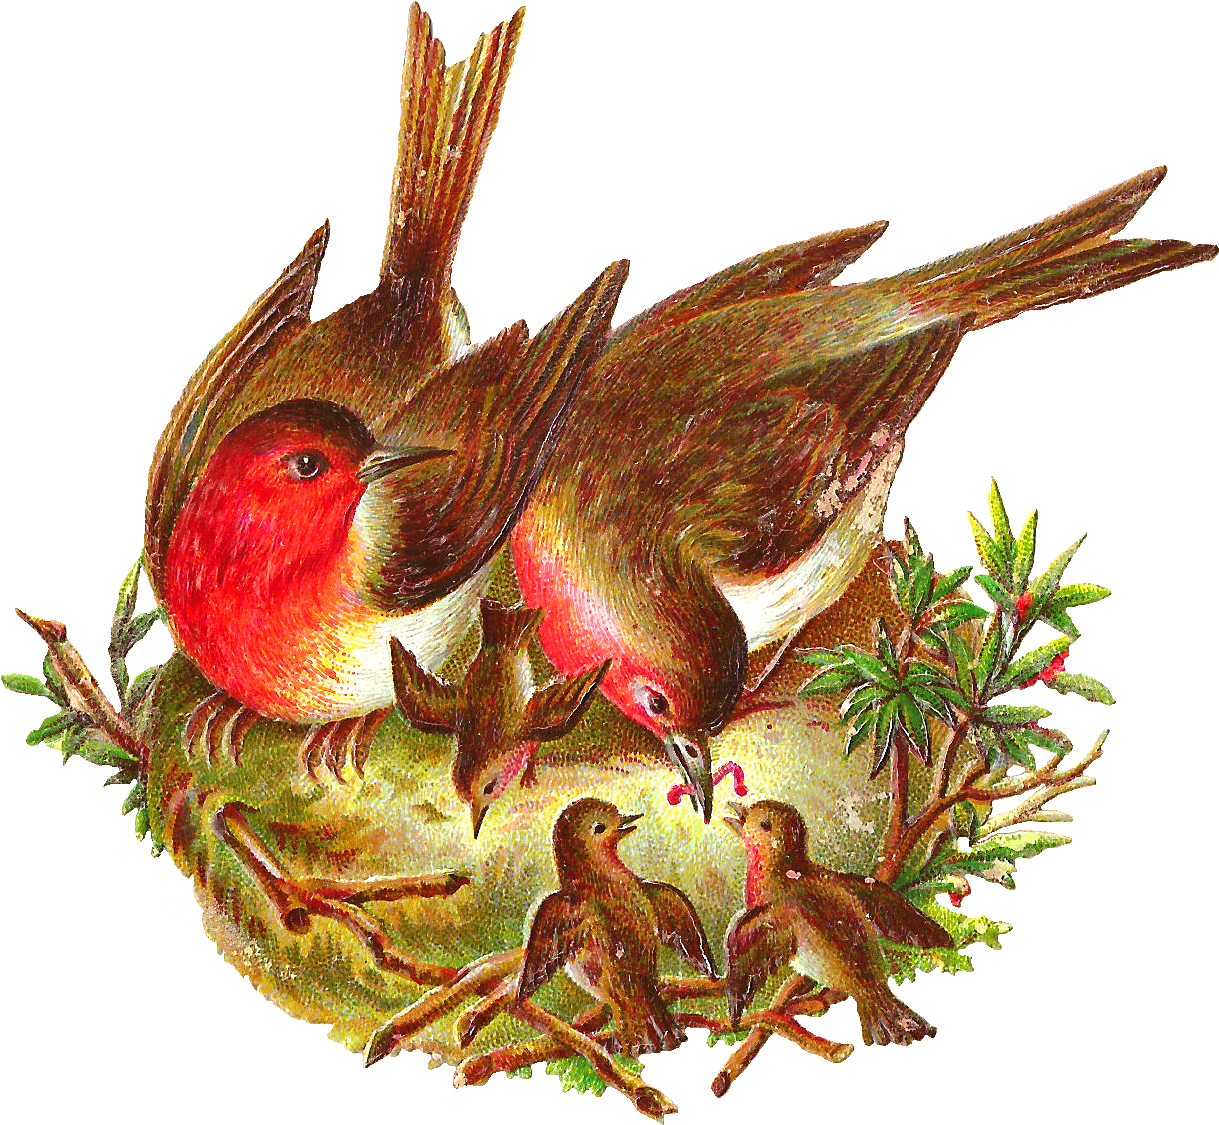 This Is An Amazing Bird Digital Graphic I Created From - Bird With Nest Png (1427x1285)